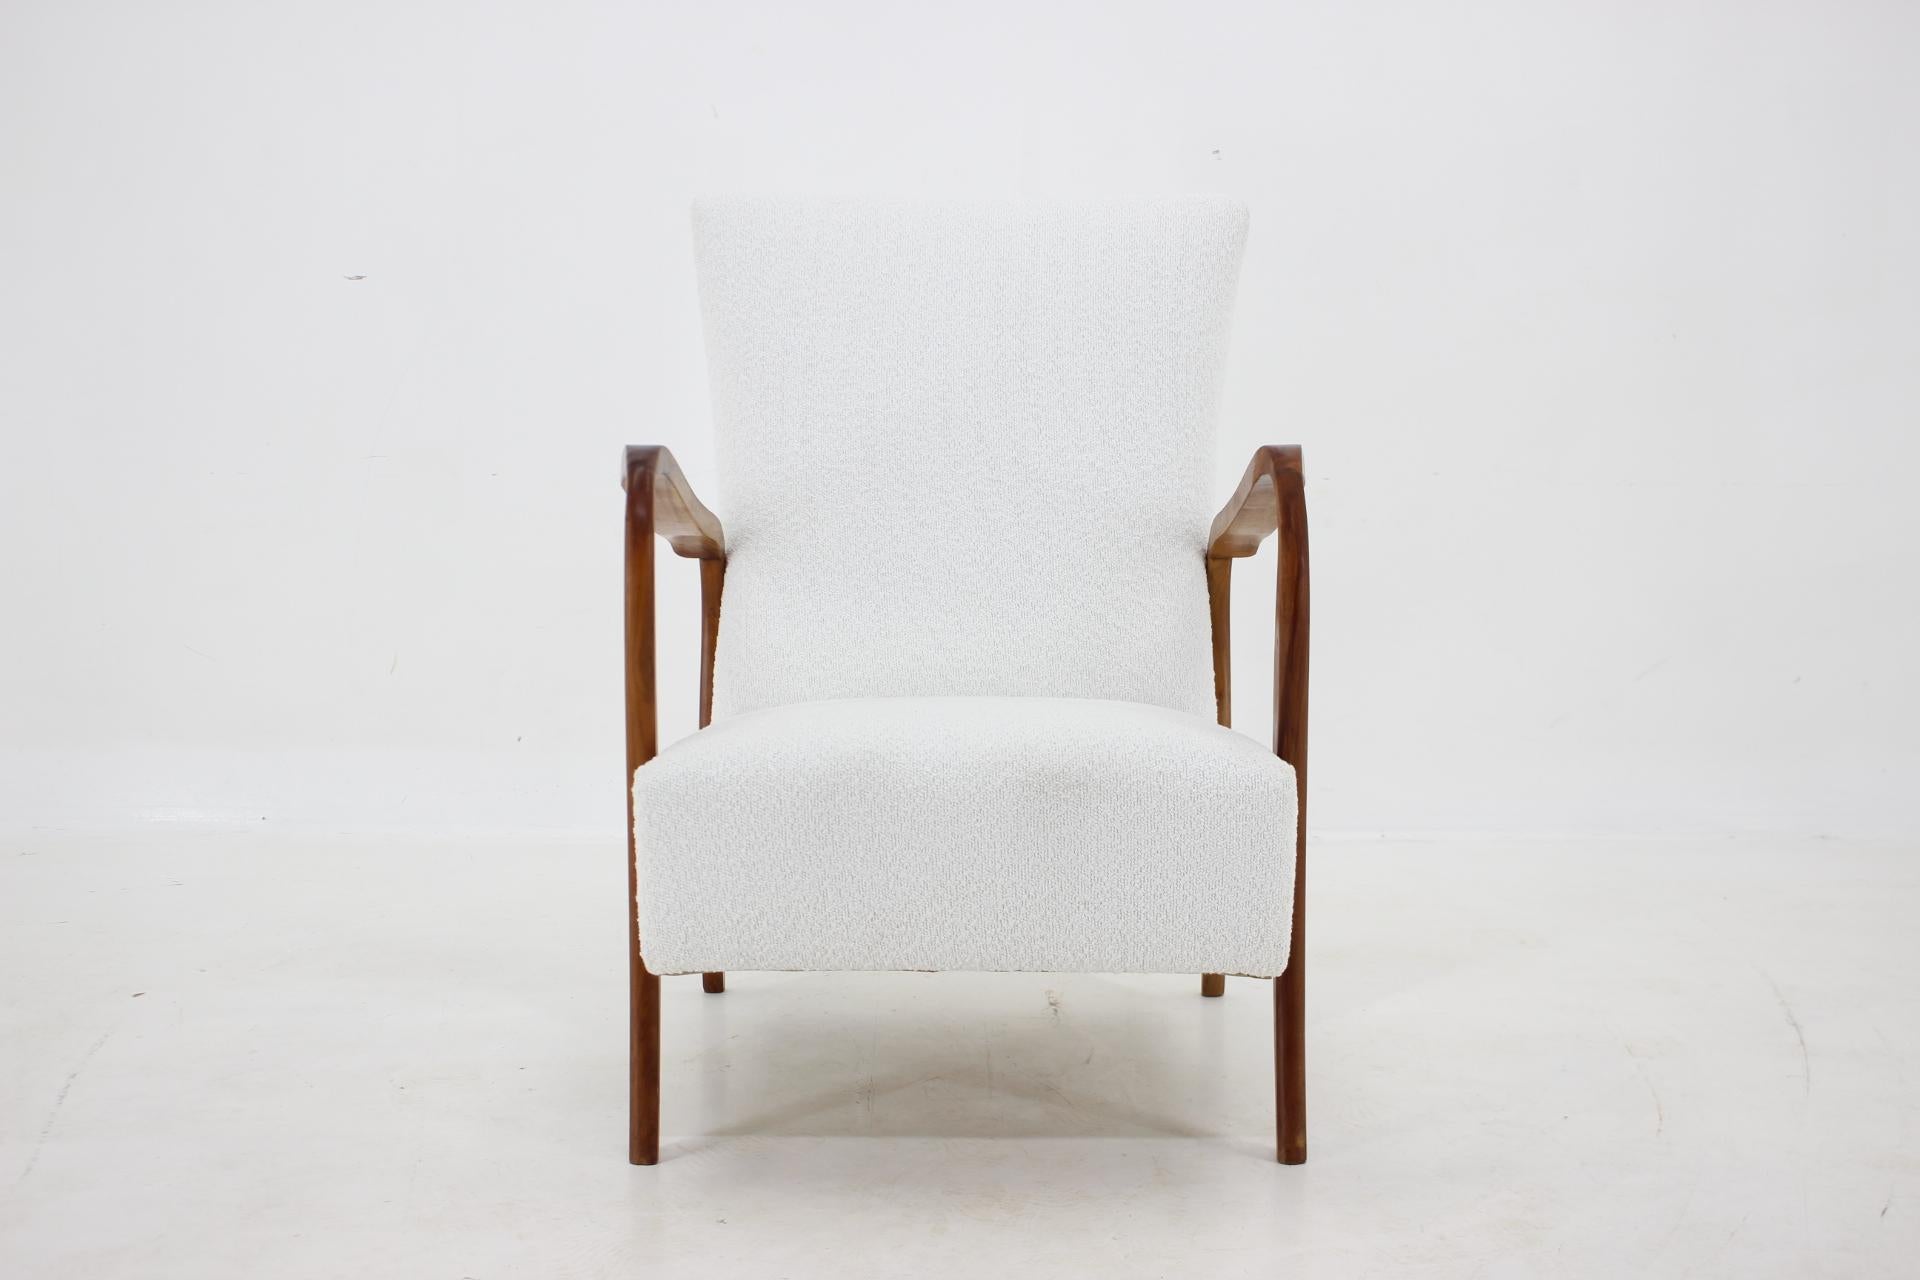 - newly upholstered in white Boucle fabric
- carefully refurbished 
- height of seat 37 cm.